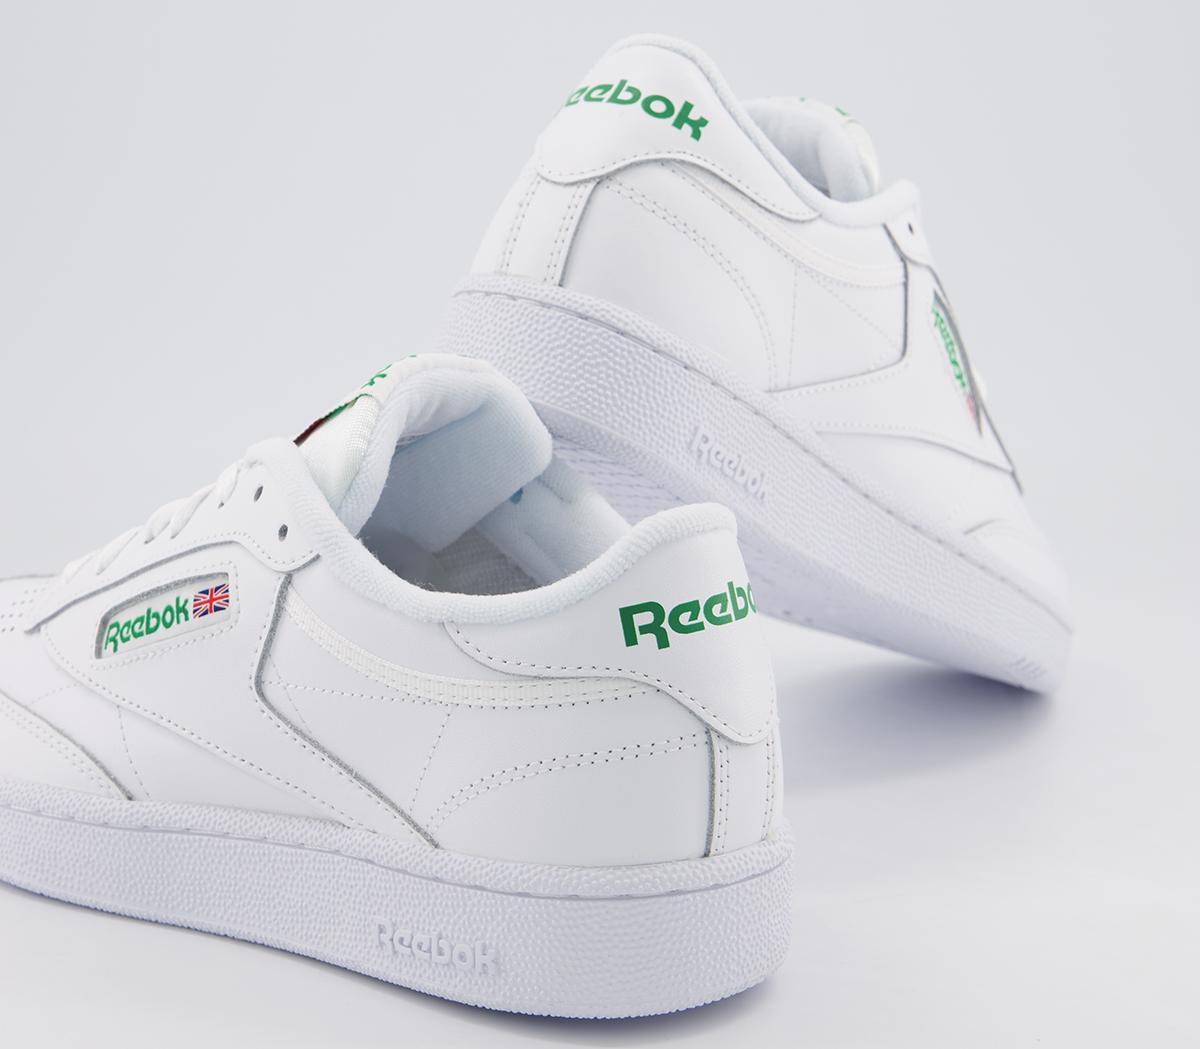 Reebok Club C 85 Trainers White Green - His trainers